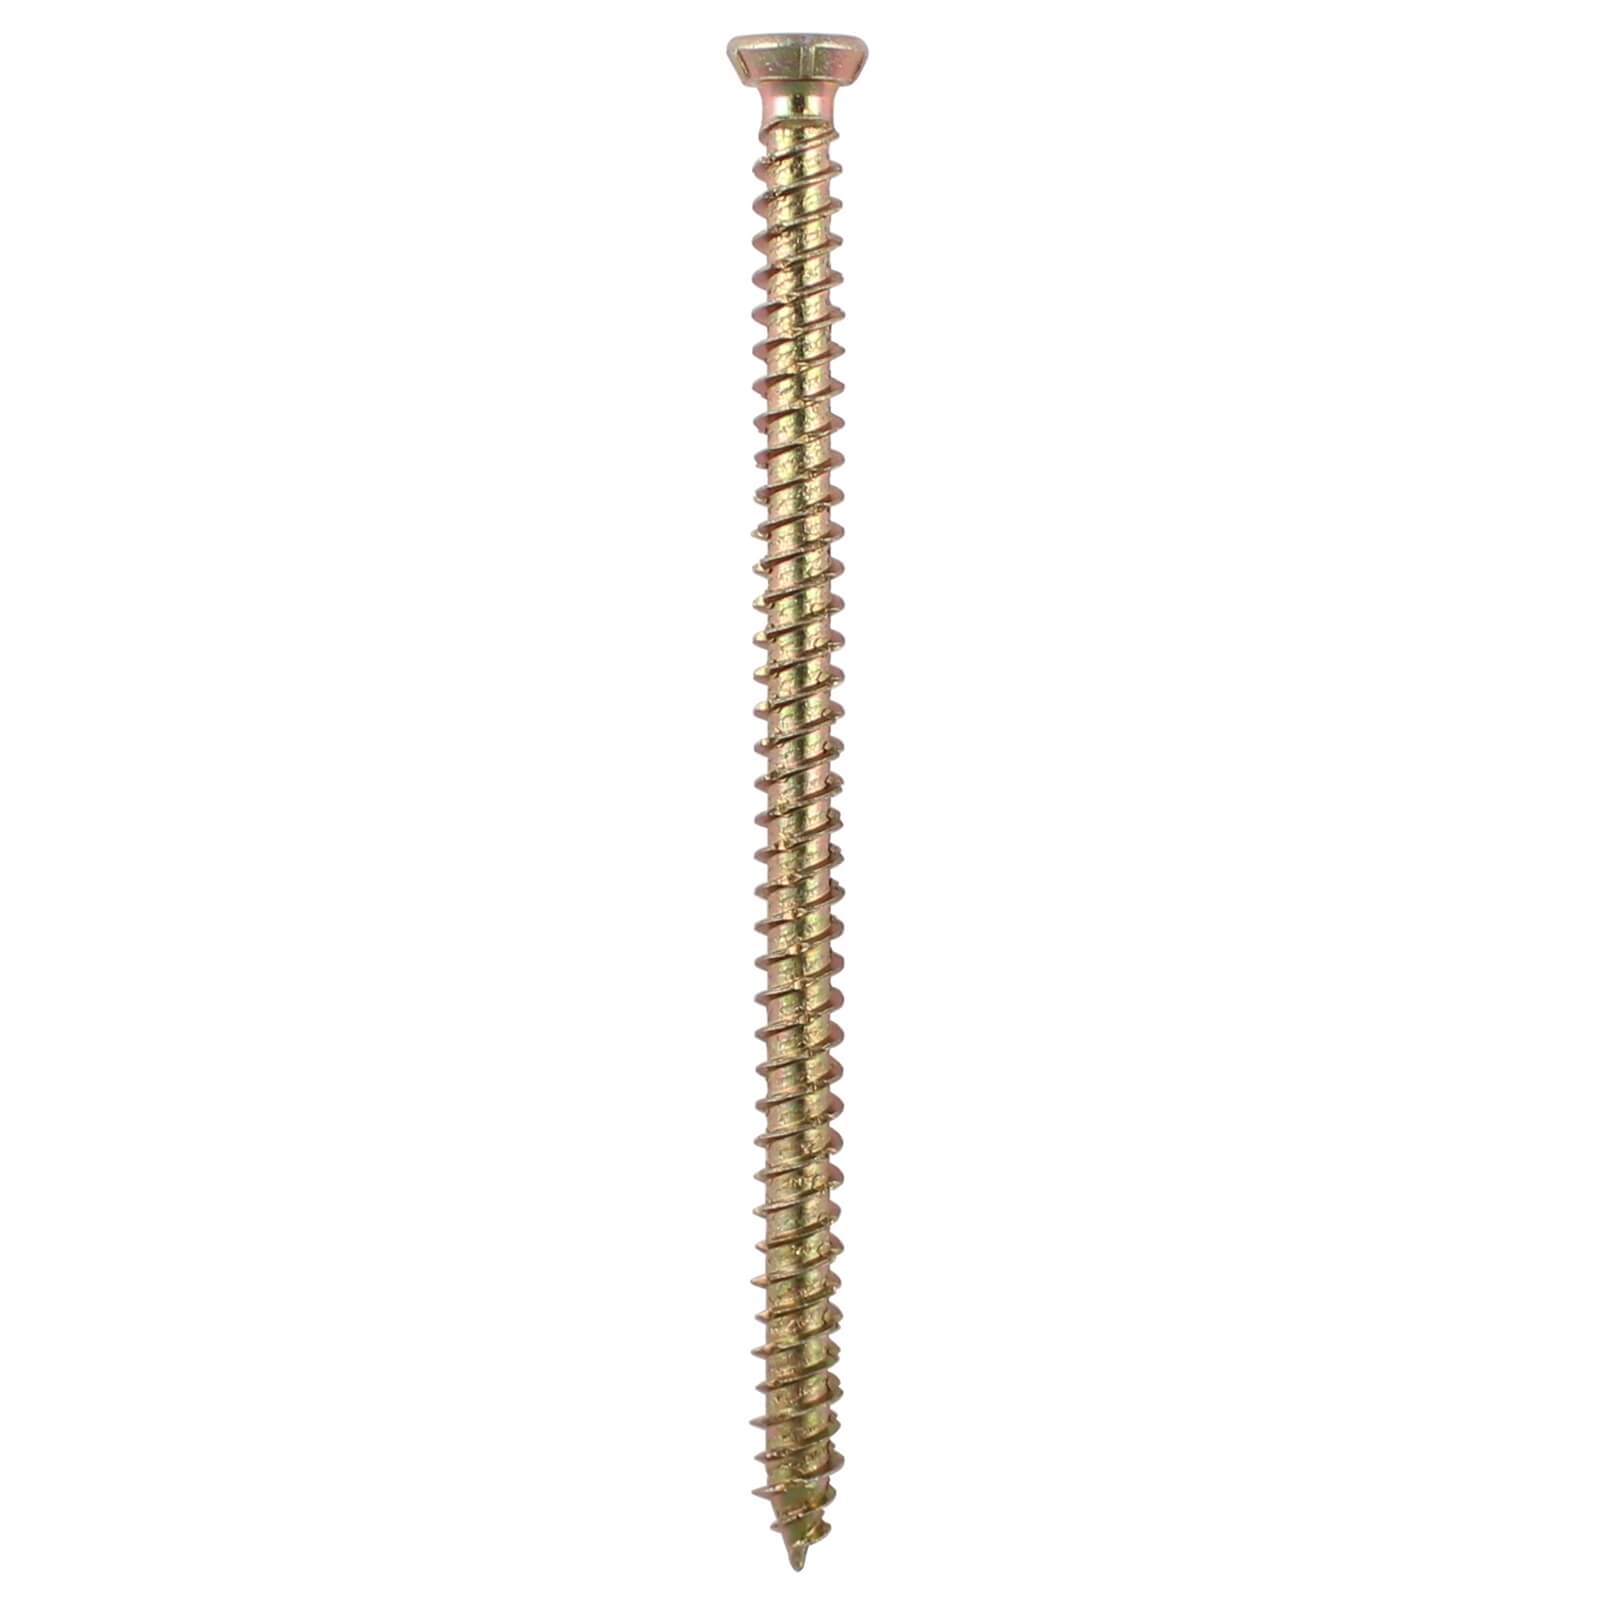 Concrete Screw Zyp 7.5mm x 80mm - Pack of 65